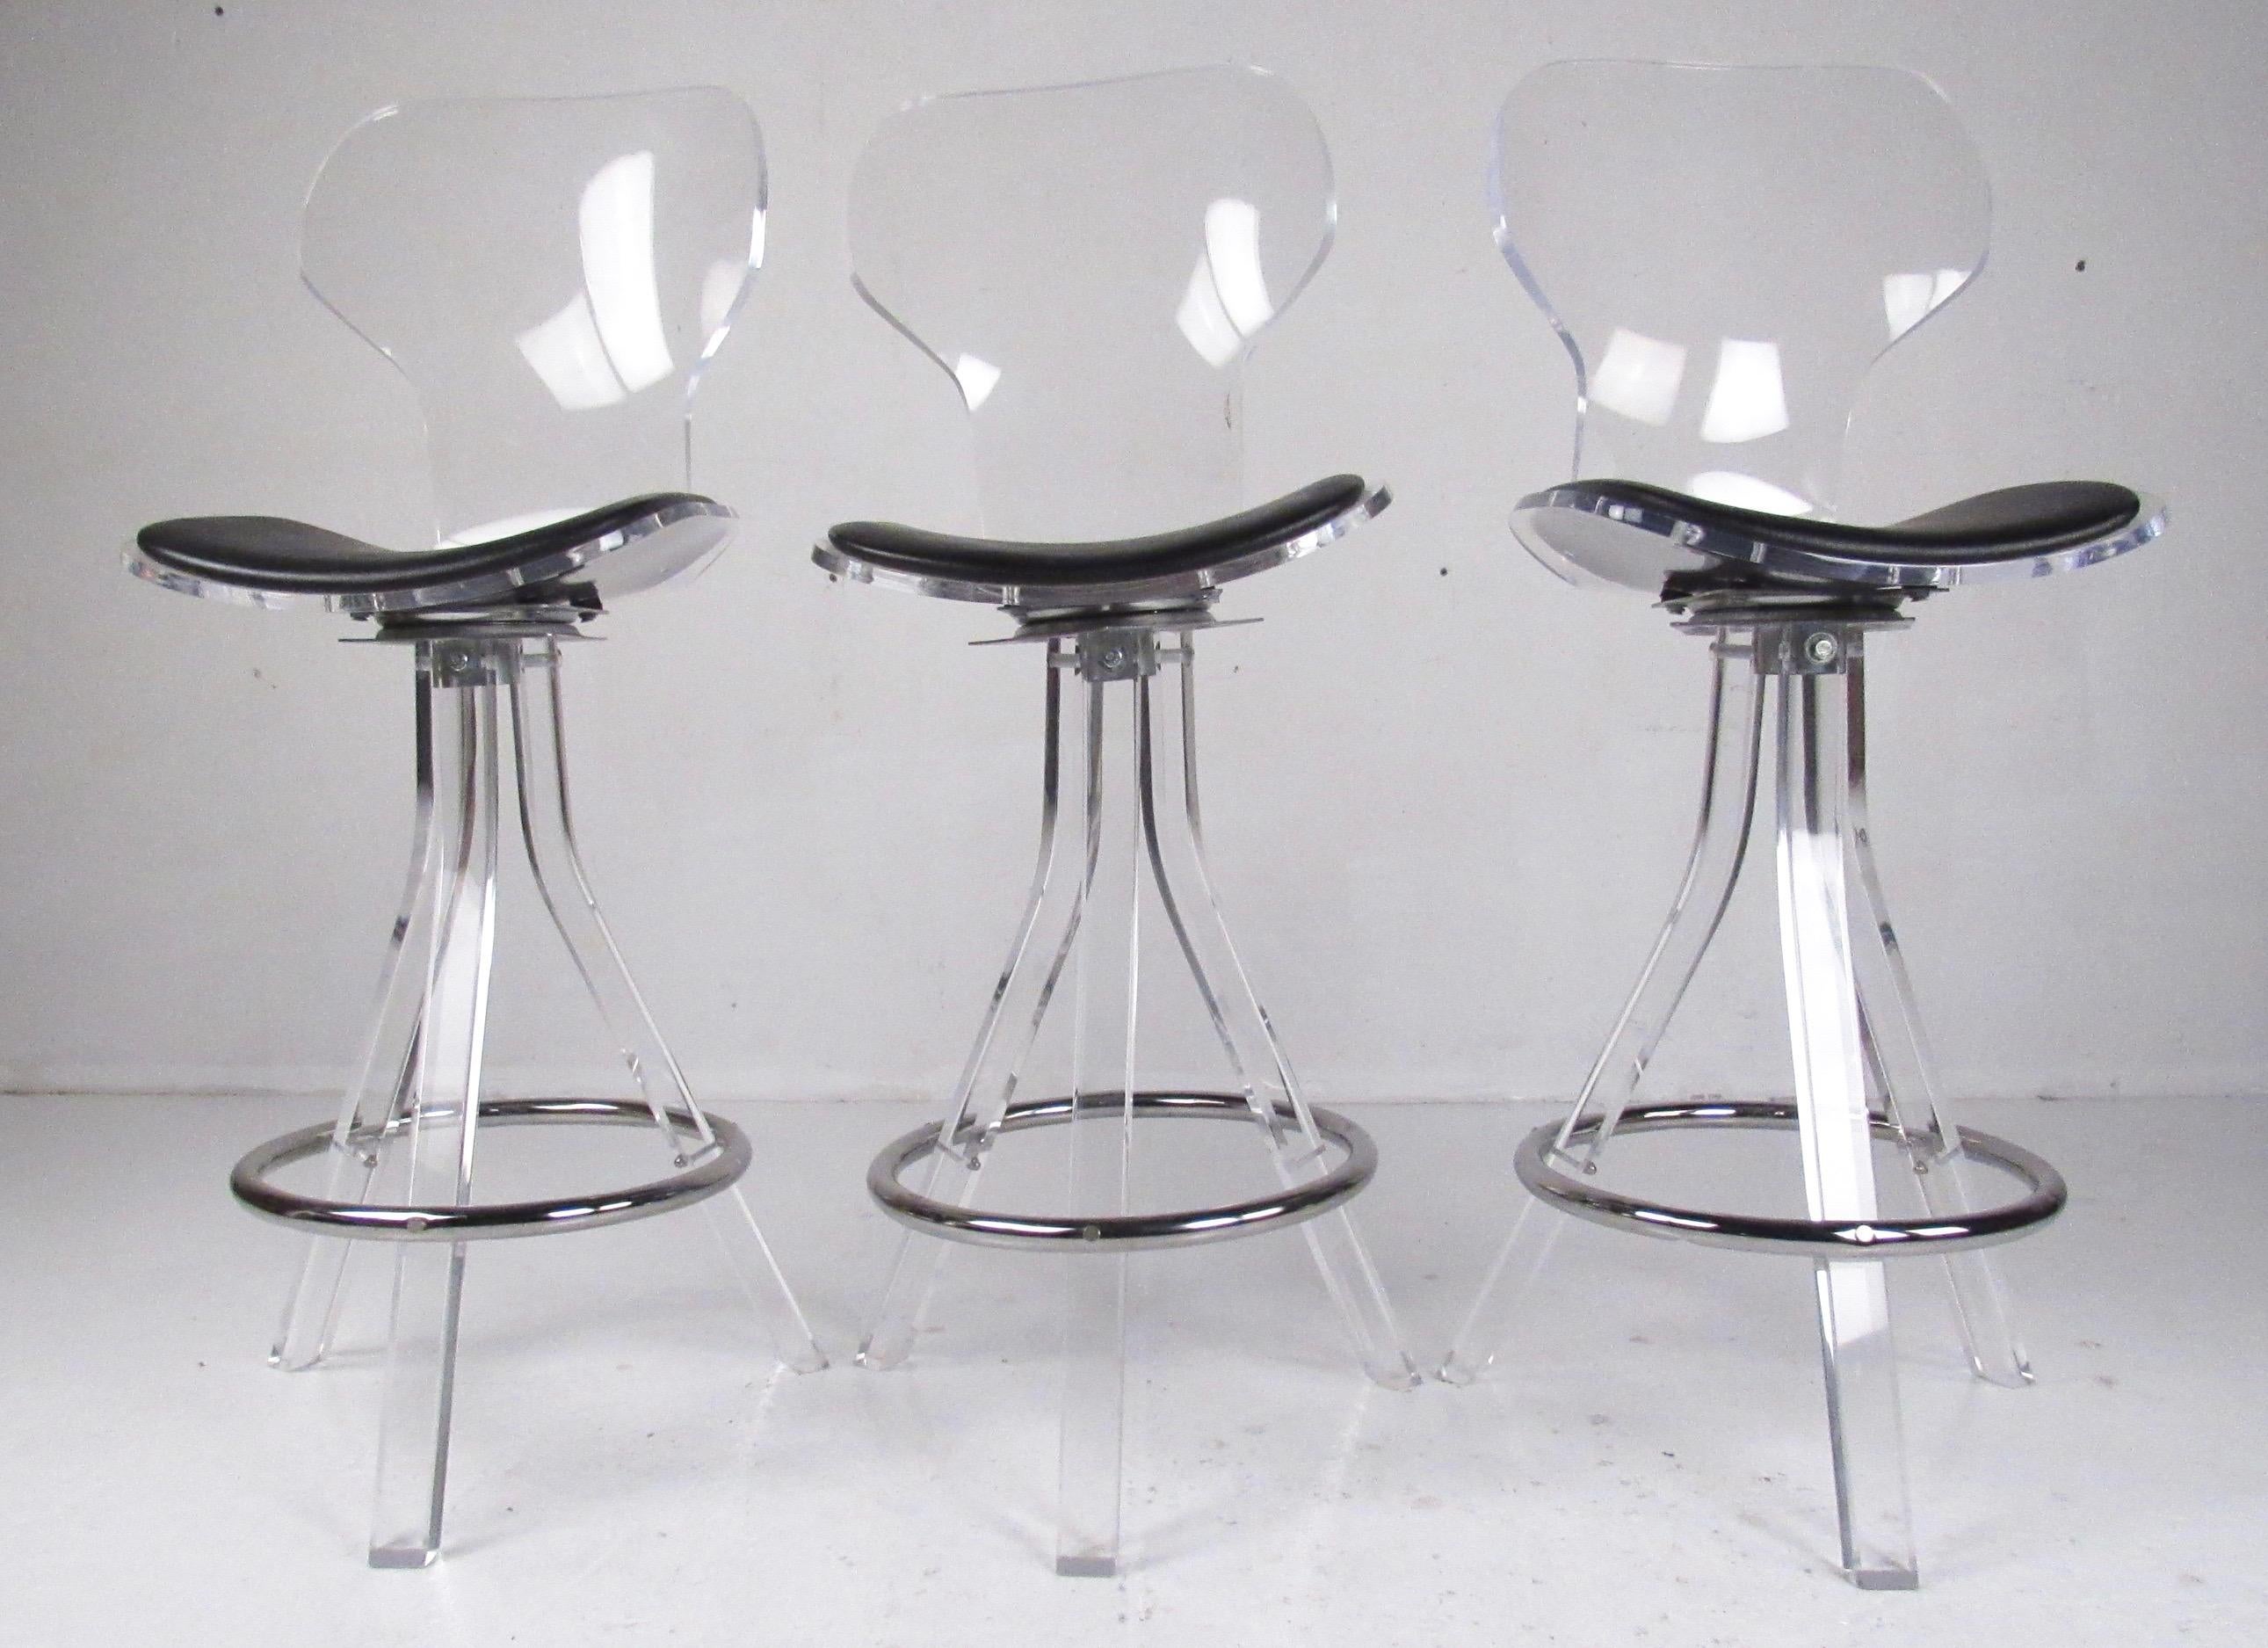 This stylish set of modern bar stools features acrylic construction with padded vinyl seats. Comfortable shapely seatbacks add midcentury style to home or business bar or counter seating. Seat height is 29 inches high, swivel seats. Please confirm